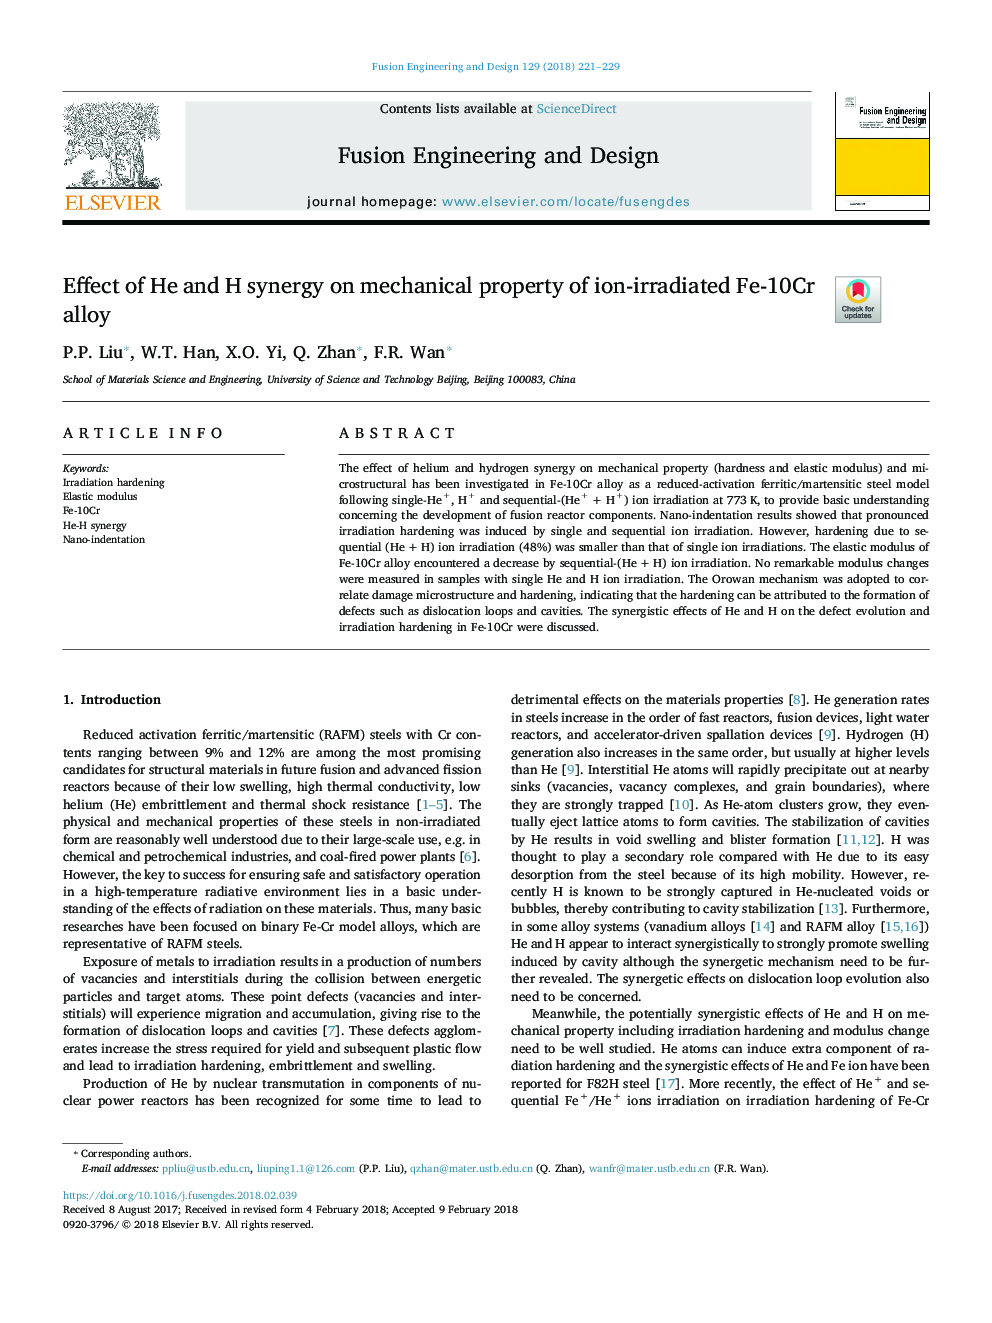 Effect of He and H synergy on mechanical property of ion-irradiated Fe-10Cr alloy